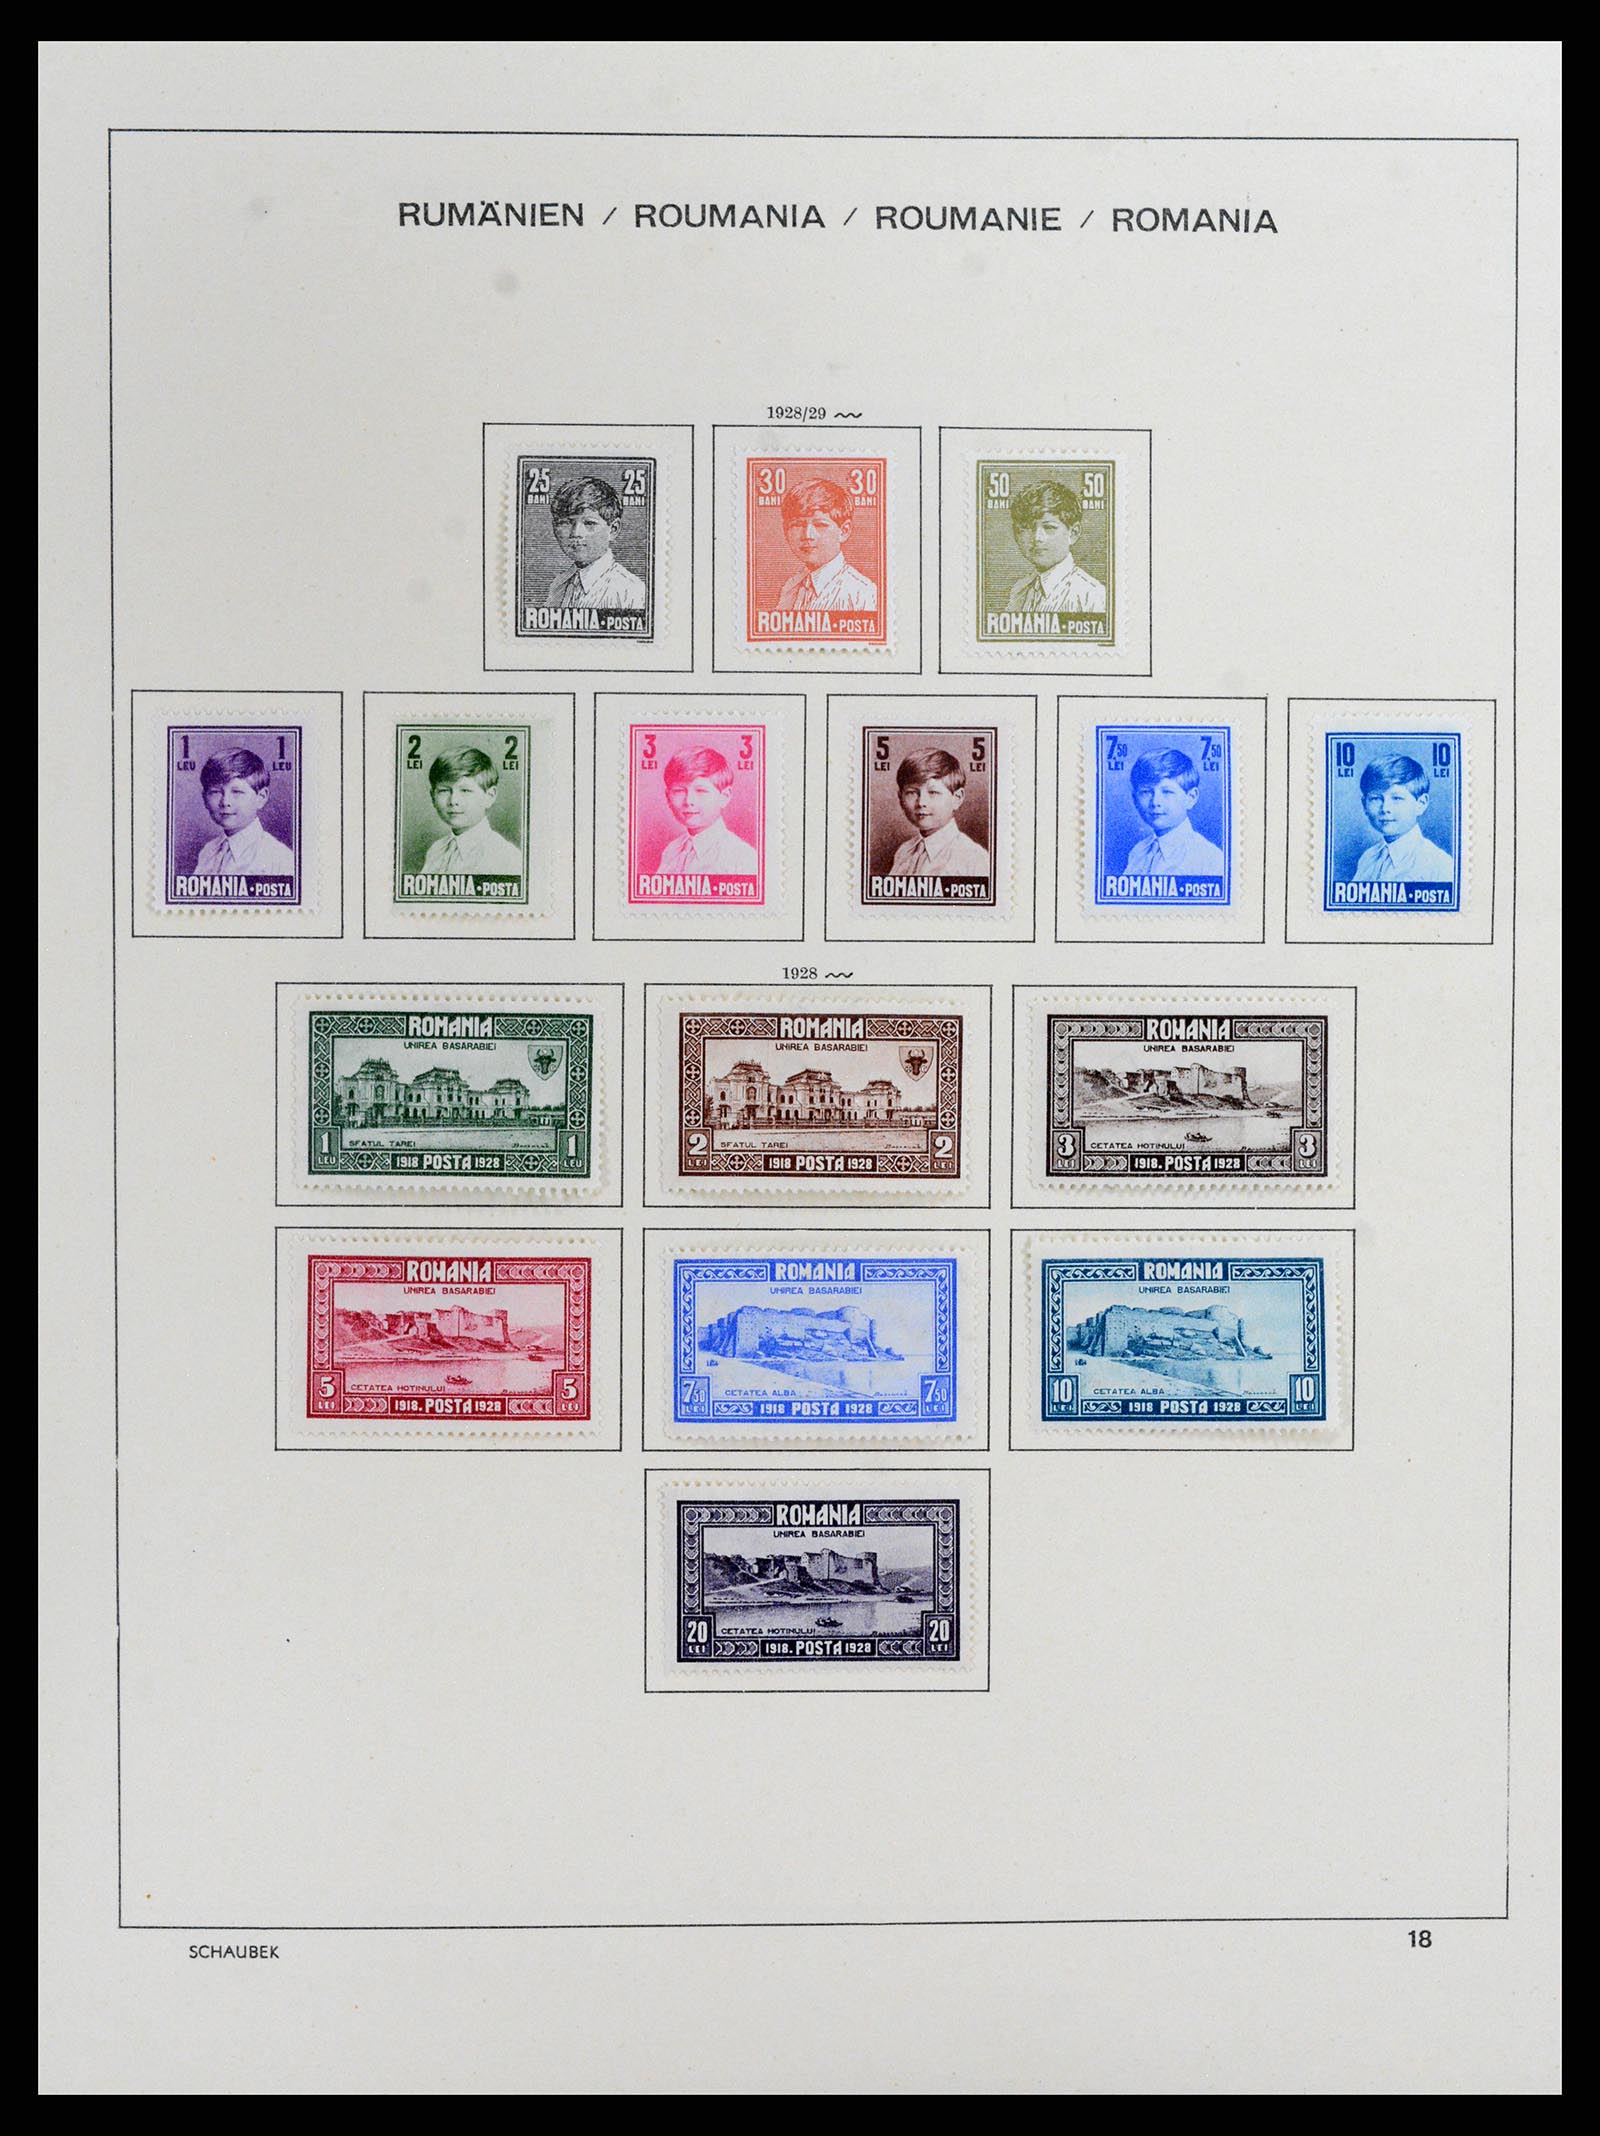 37596 020 - Stamp collection 37596 Romania 1862-2010.